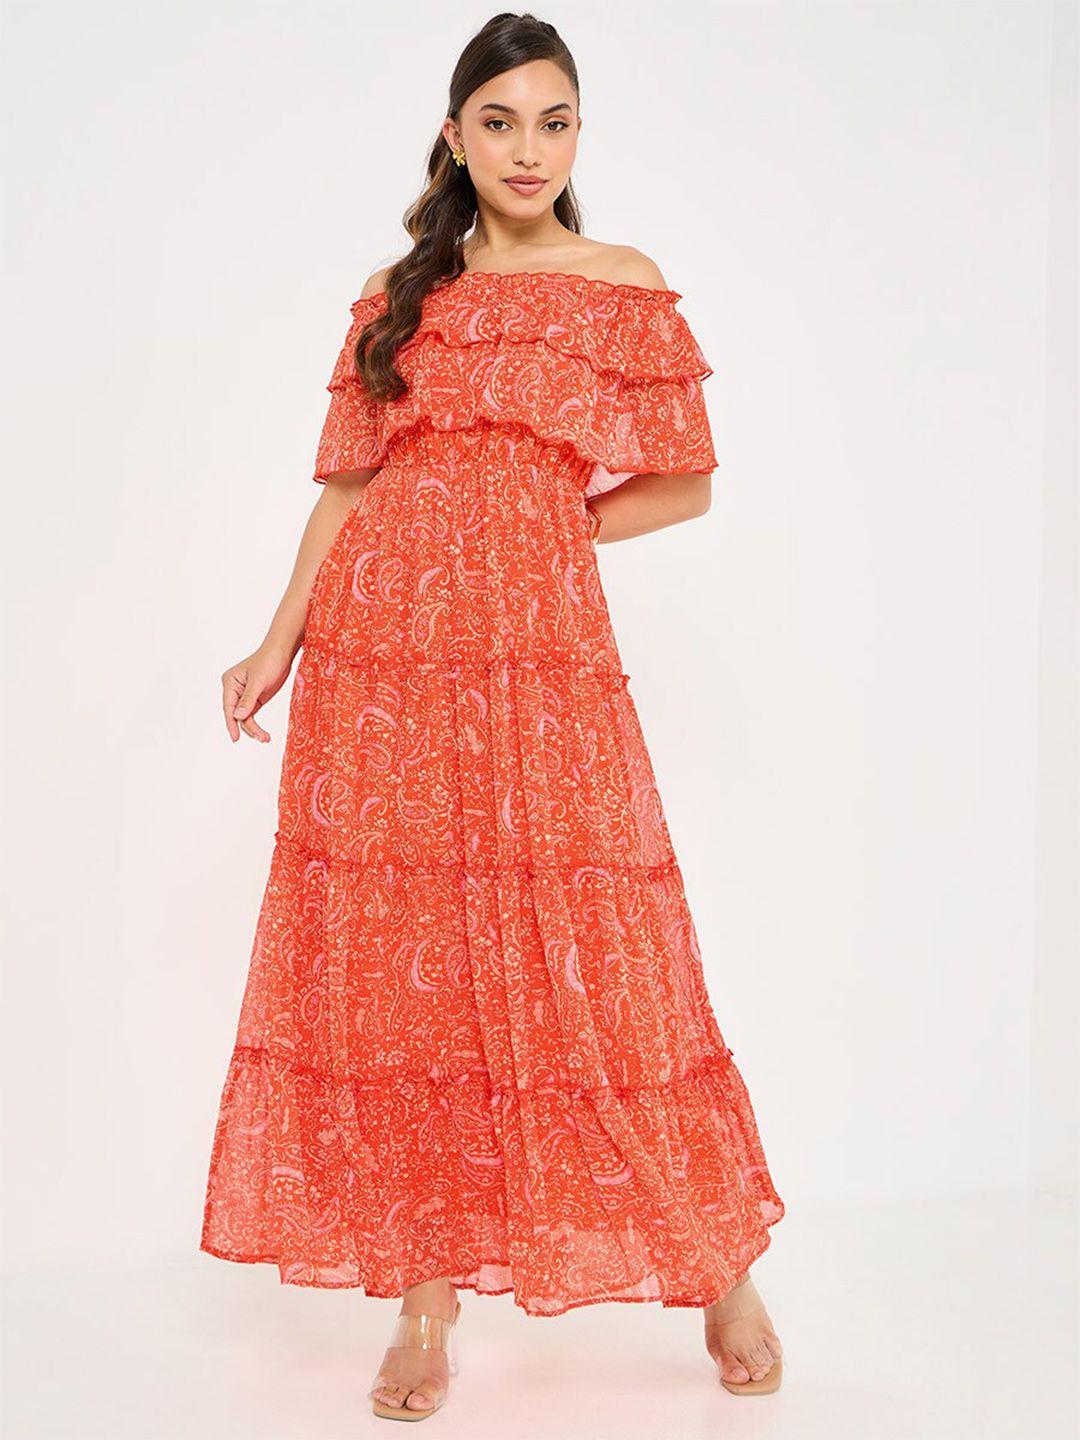 styli-printed-off-shoulder-tired-maxi-dress